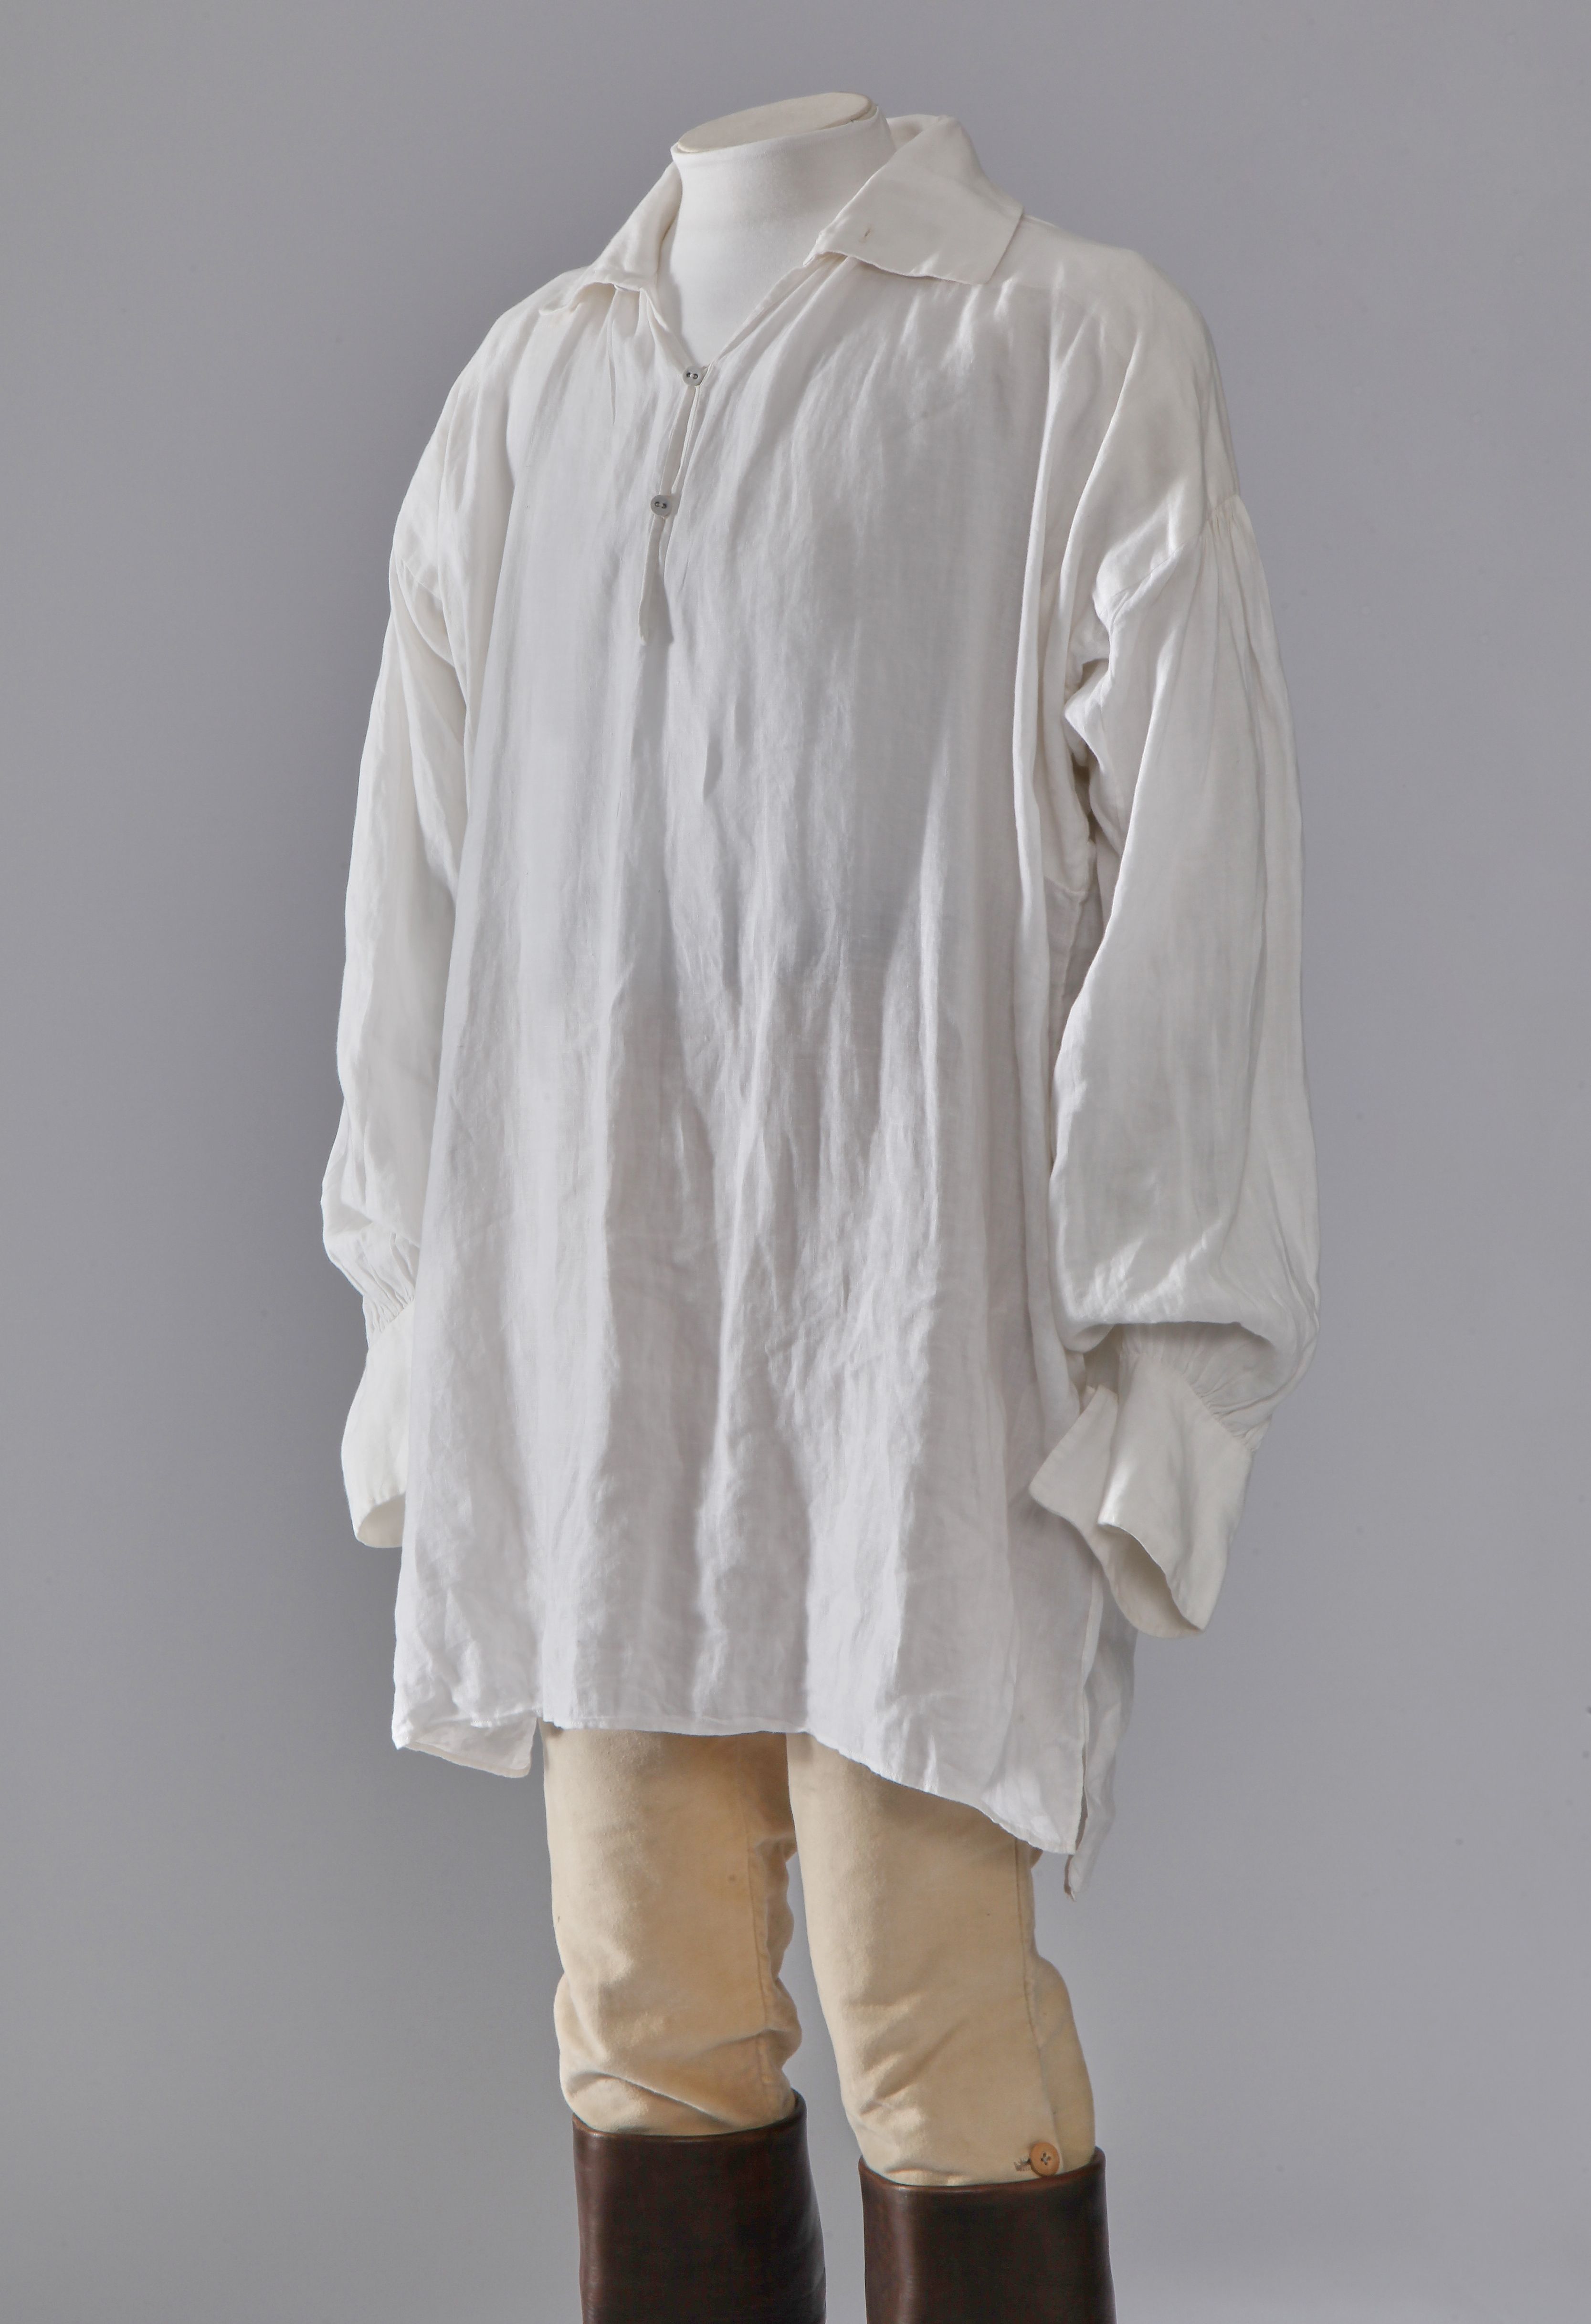 The shirt worn by Colin Firth 